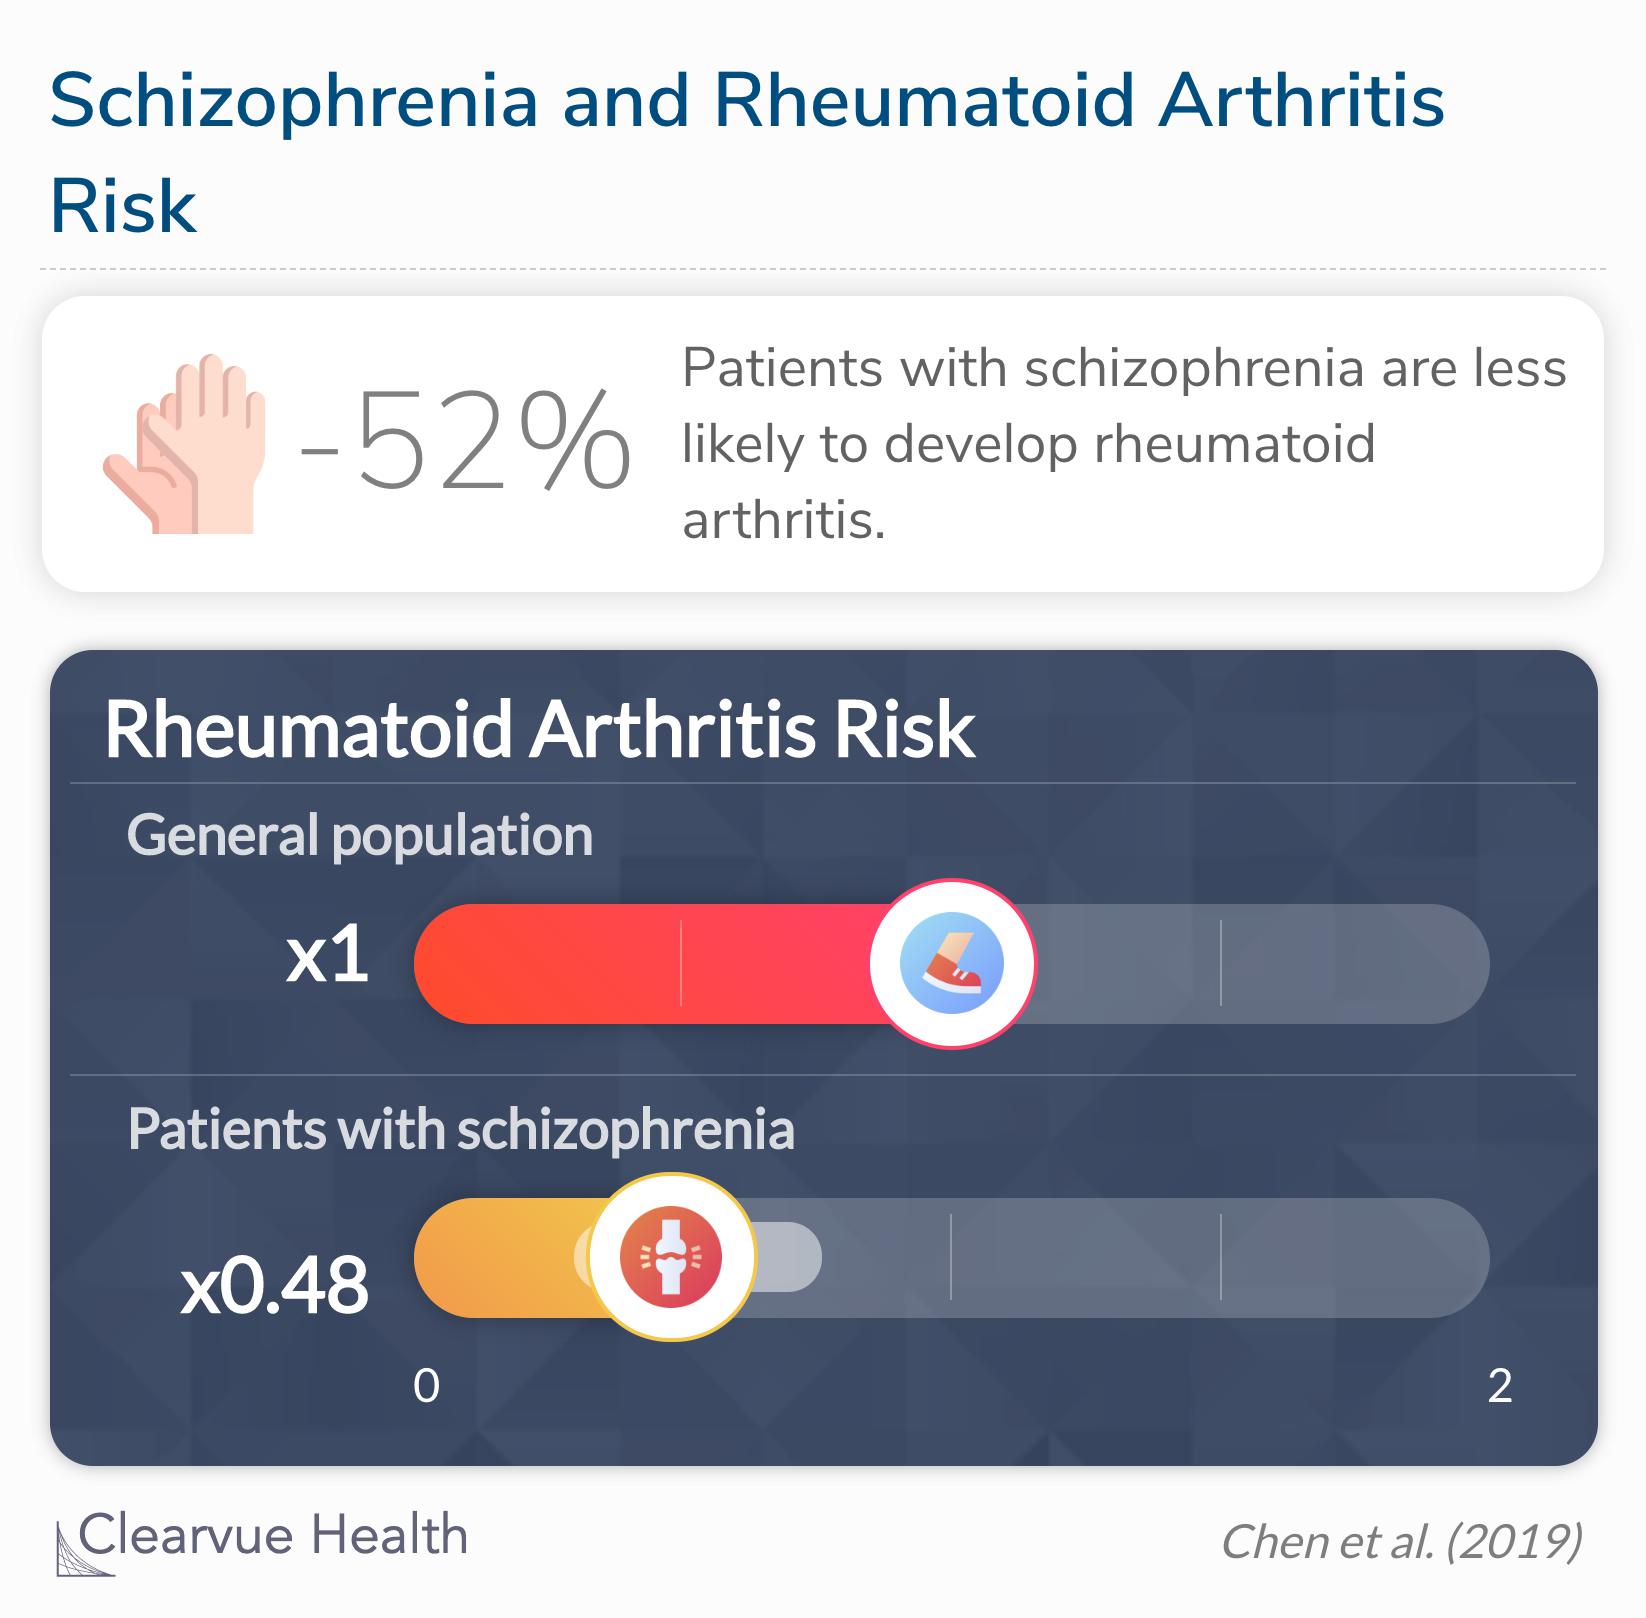 Patients with schizophrenia were significantly less likely to develop rheumatoid arthritis compared to the general population. 